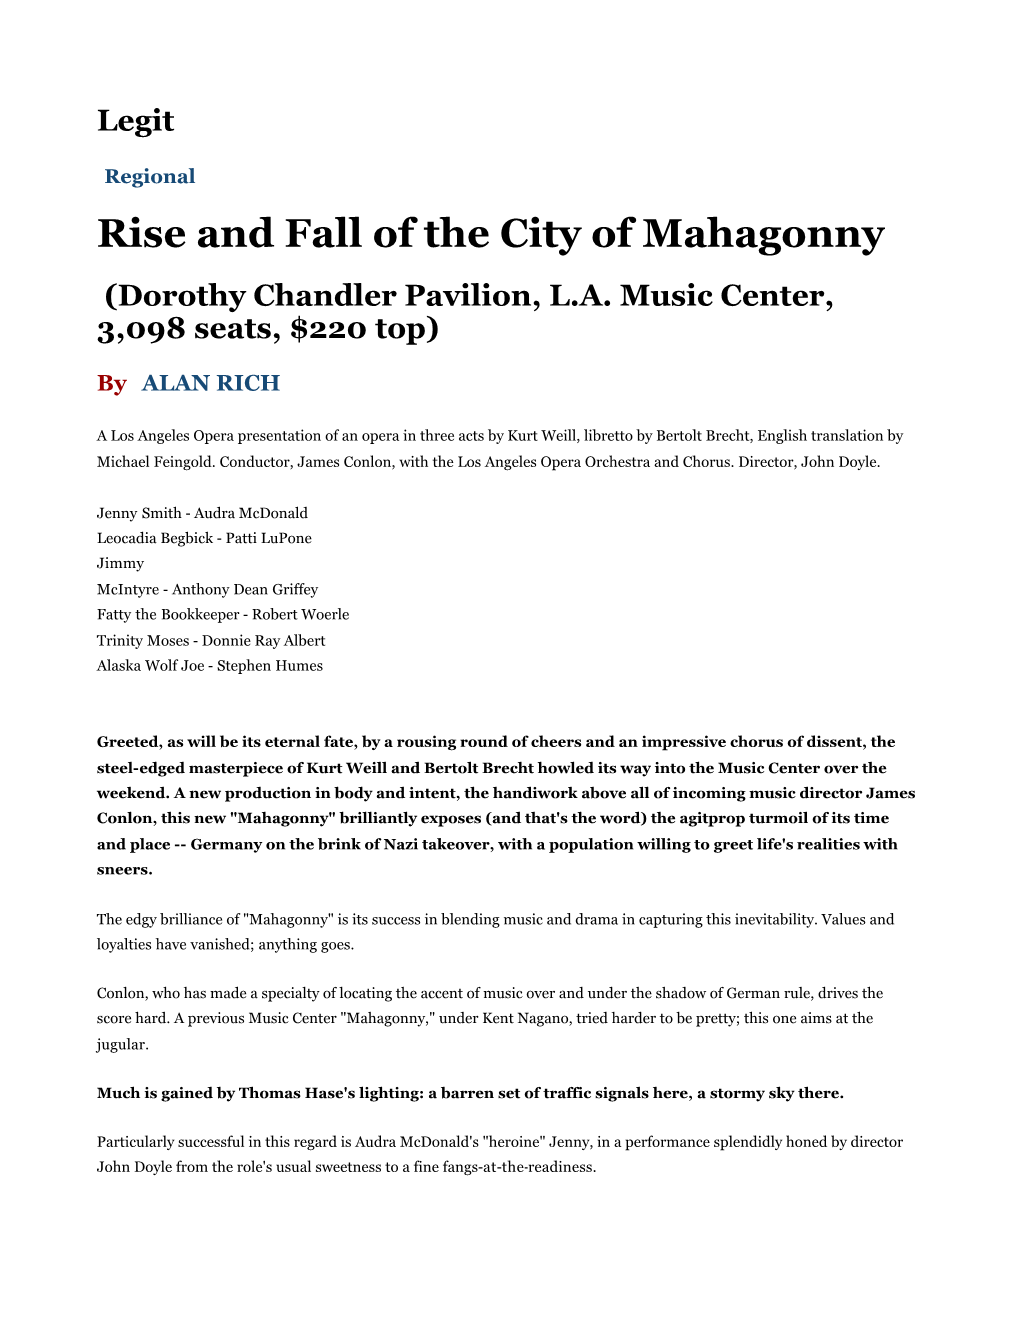 Rise and Fall of the City of Mahagonny (Dorothy Chandler Pavilion, L.A